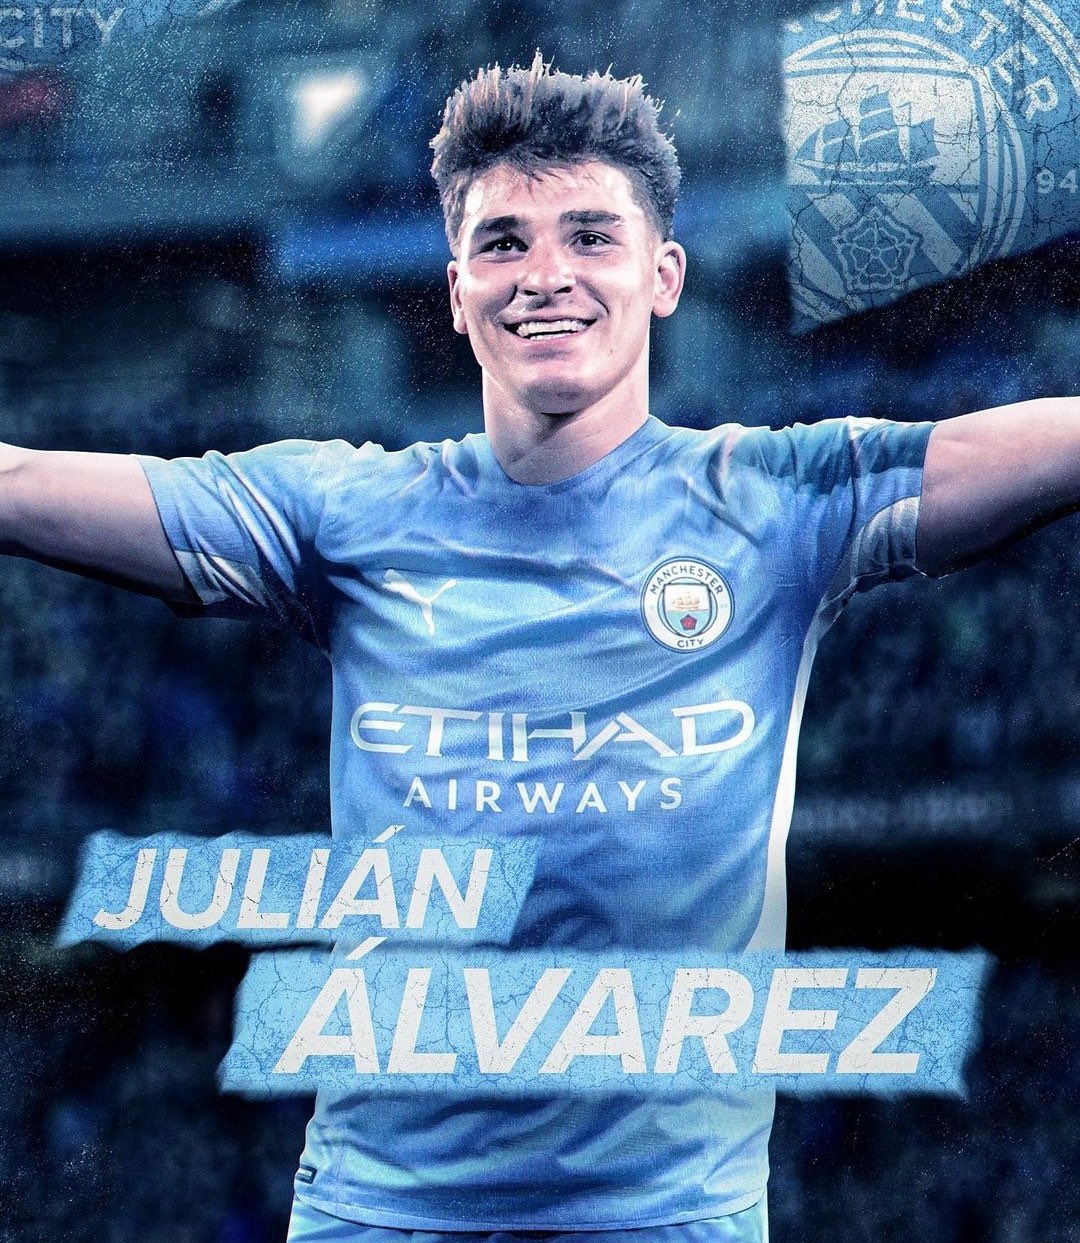 Transfer News Central: Manchester City Have Signed Forward Julian Alvarez For £14m On A Five And A Half Year Contract. He Will Remain On Loan At River Plate Until July